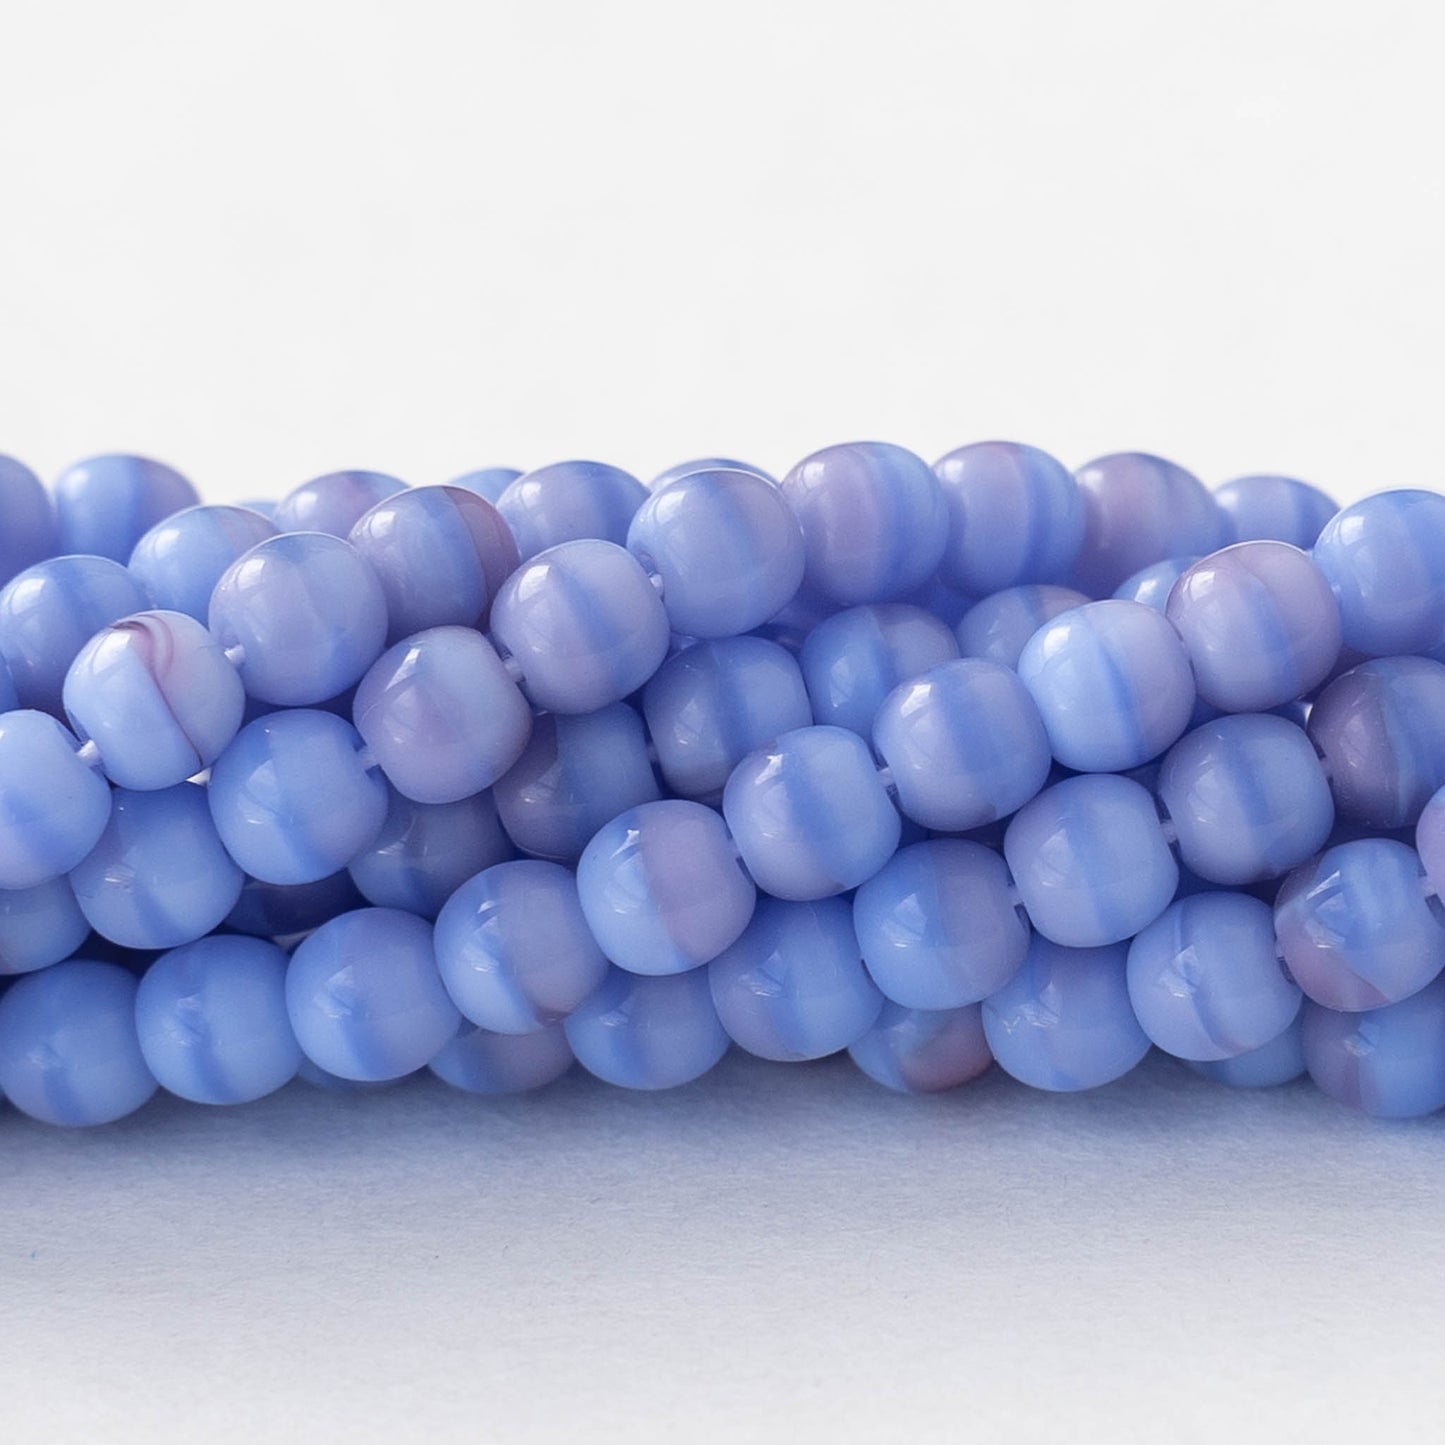 4mm Round Glass Beads - Light Blue Marble - 120 Beads